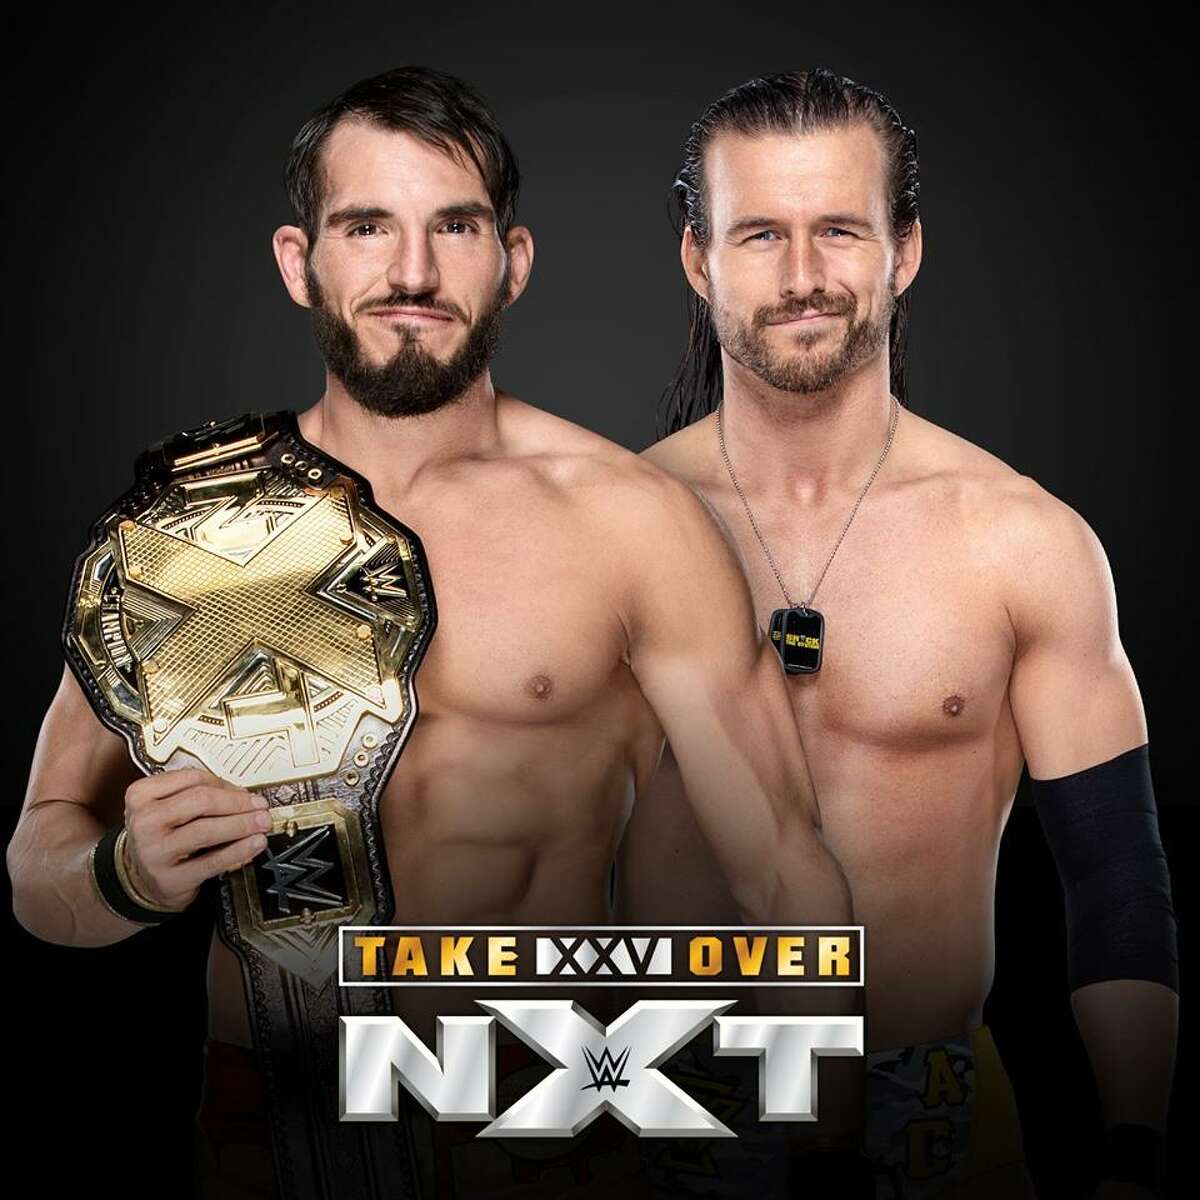 Bridgeport’s Webster Bank Arena is hosting WWE NXT TakeOver XXV June 1, with a card featuring the NXT Championship Match of Johnny Gargano vs. Adam Cole.